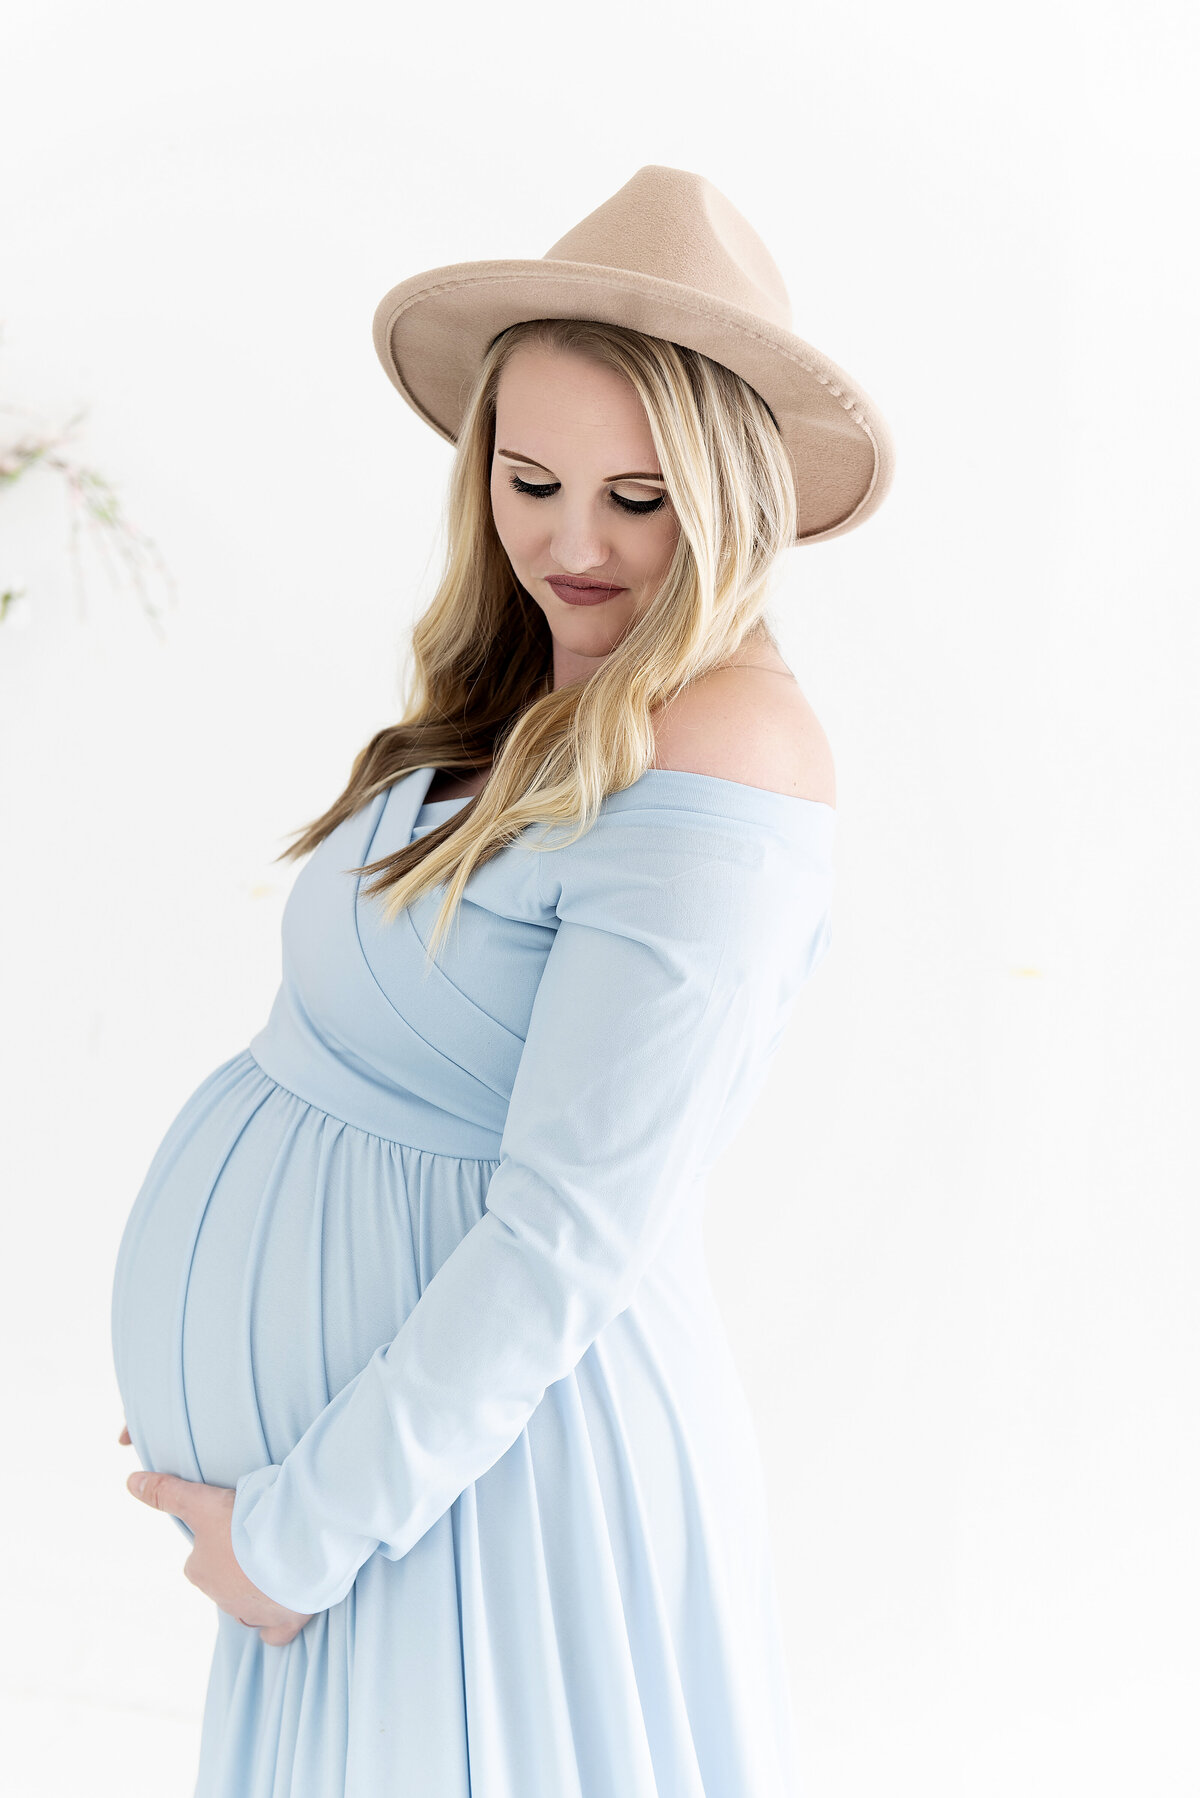 A pregnant woman in a flat brimmed hat and blue maternity gown happily holds her bump while standing in a studio